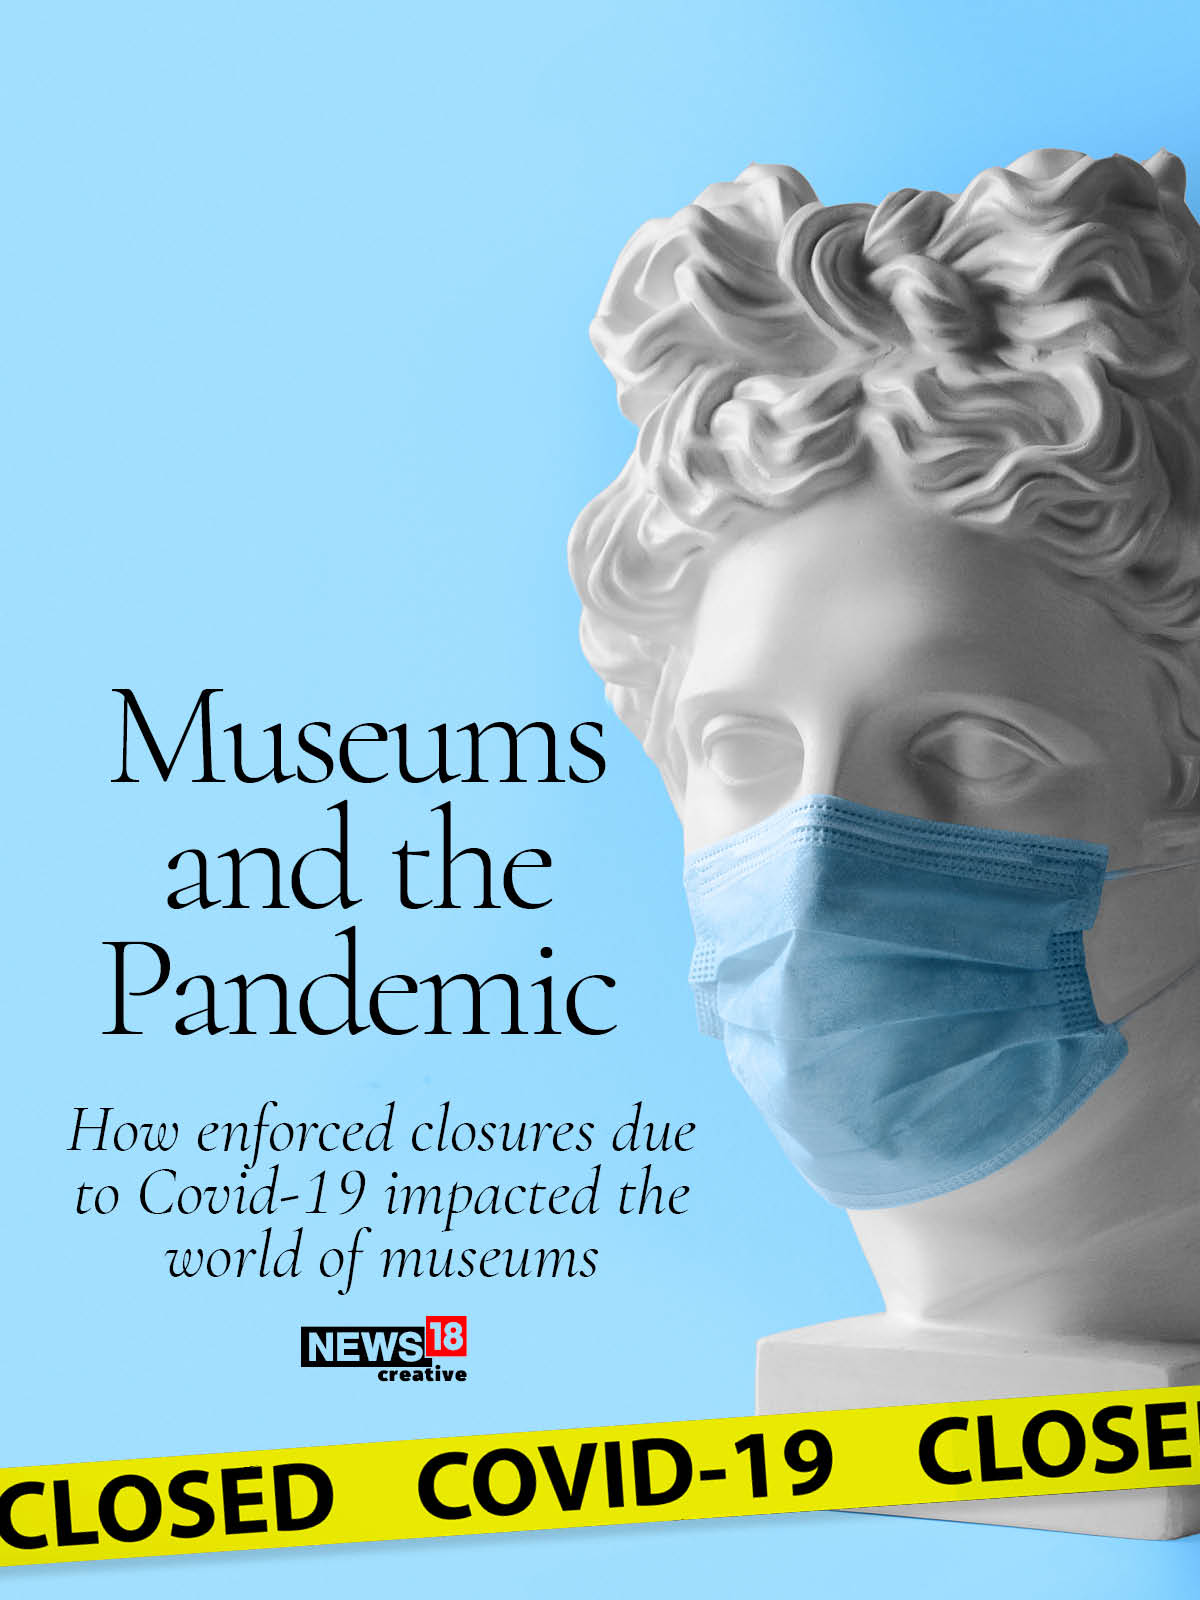 International Museum Day: The impact of Covid-19 closures
